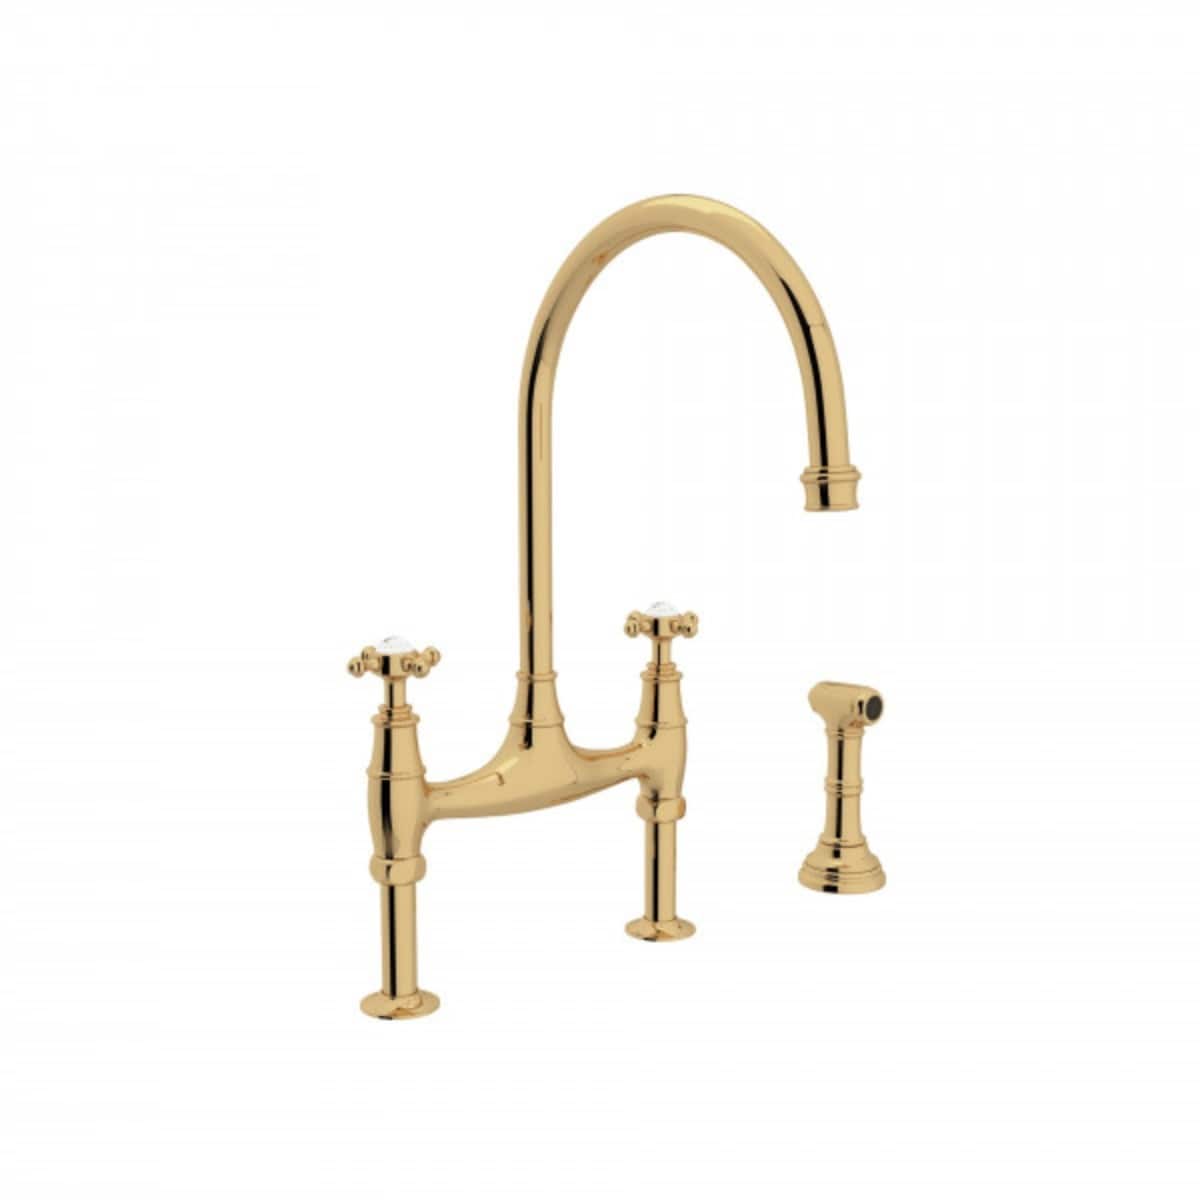 Shop Black Friday Deals On Rohl U4719l Apc 2 Perrin And Rowe Bridge Kitchen Faucet Overstock 24080285 Chrome